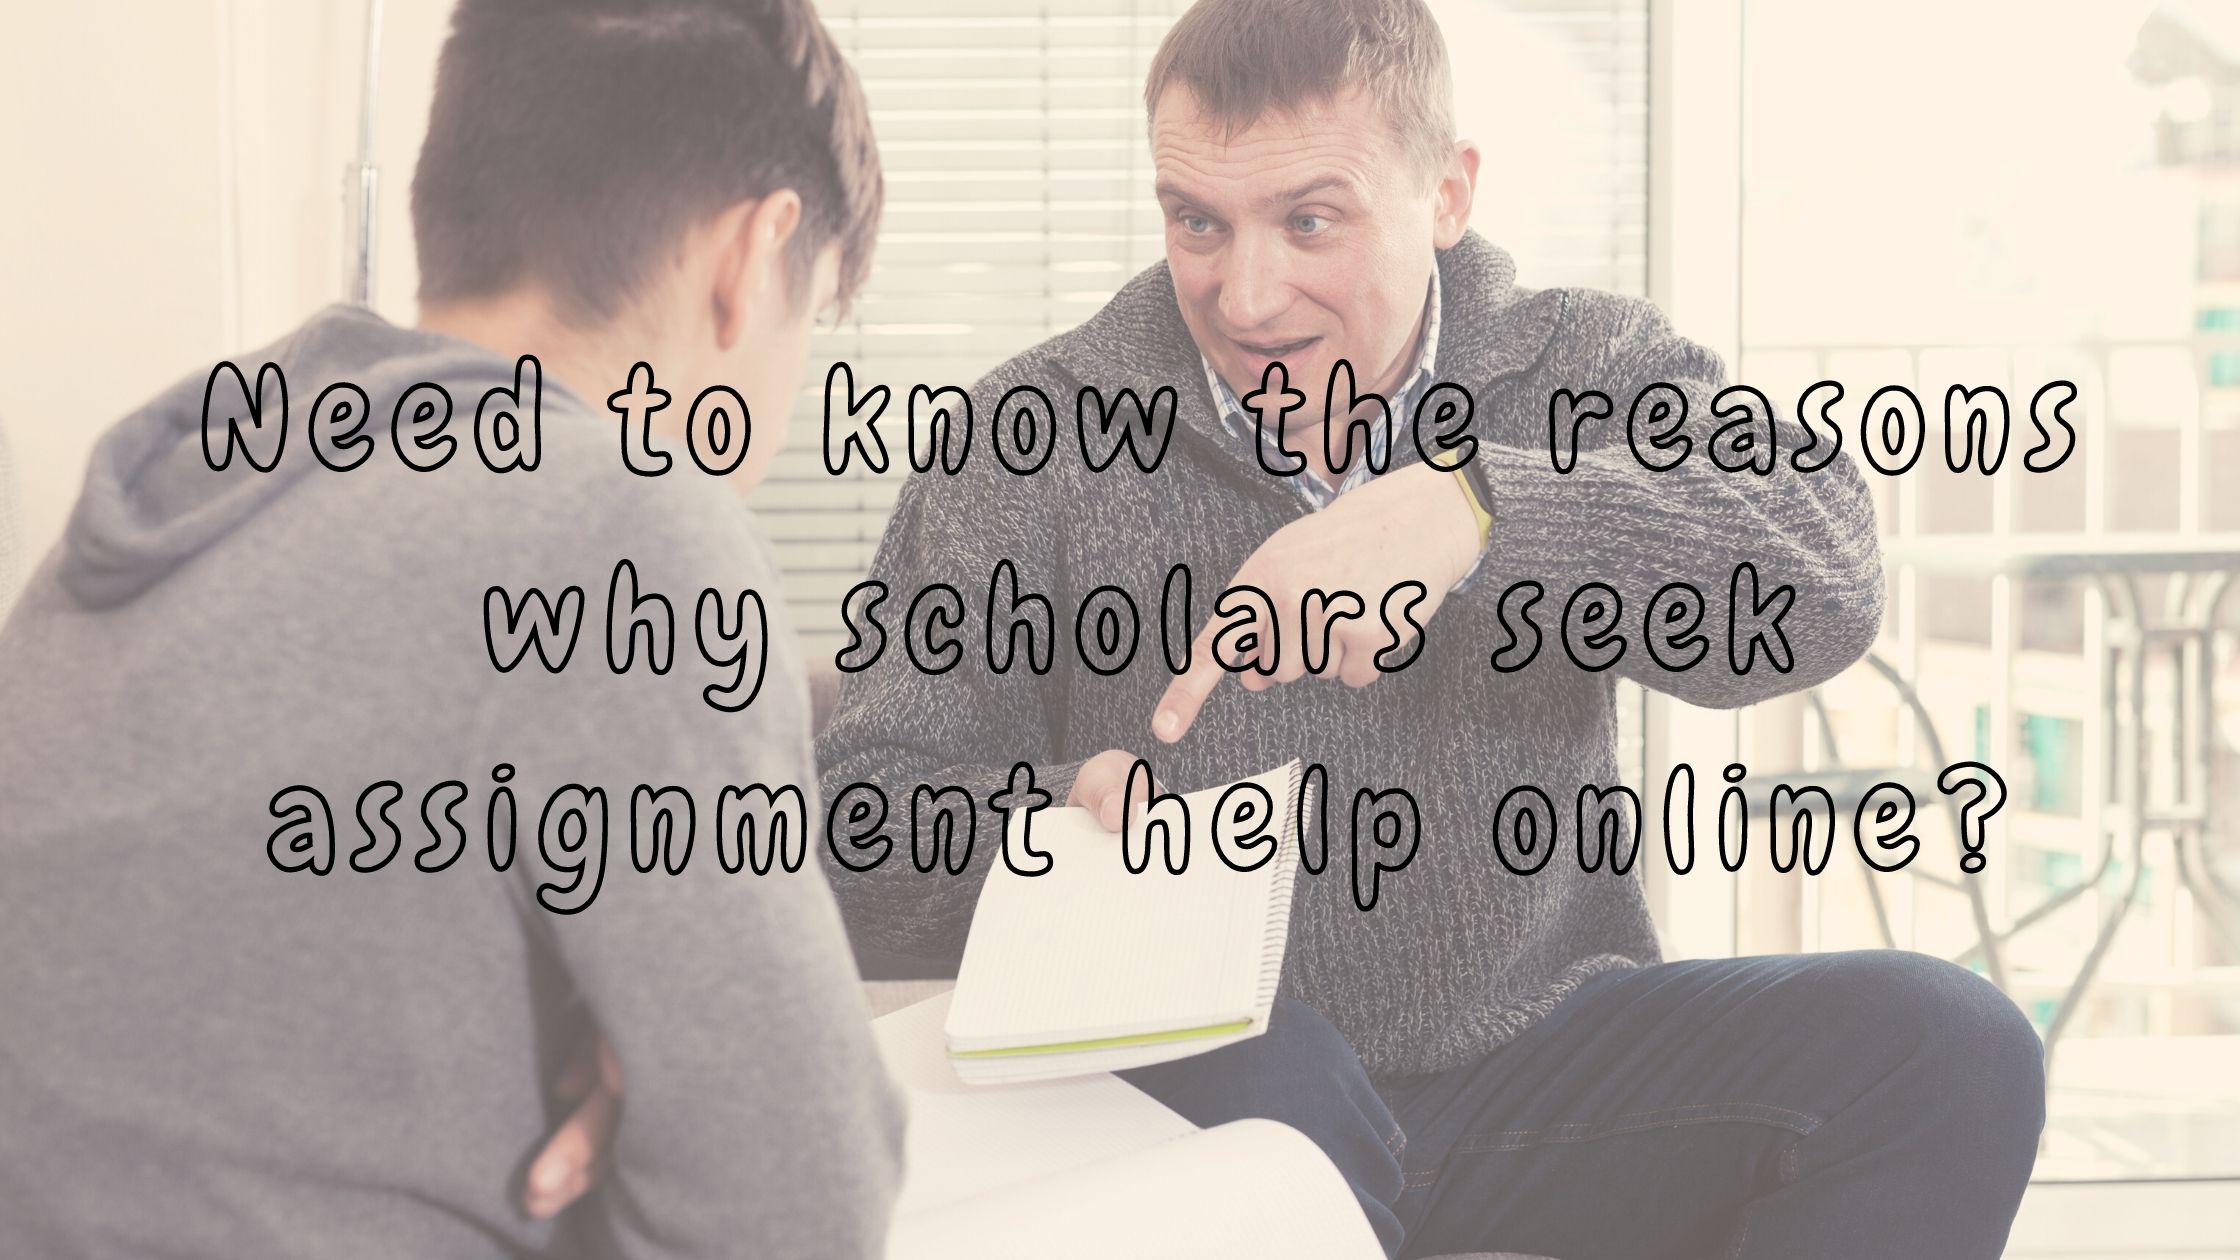 Need To Know The Reasons Why Scholars Seek Assignment Help Online?